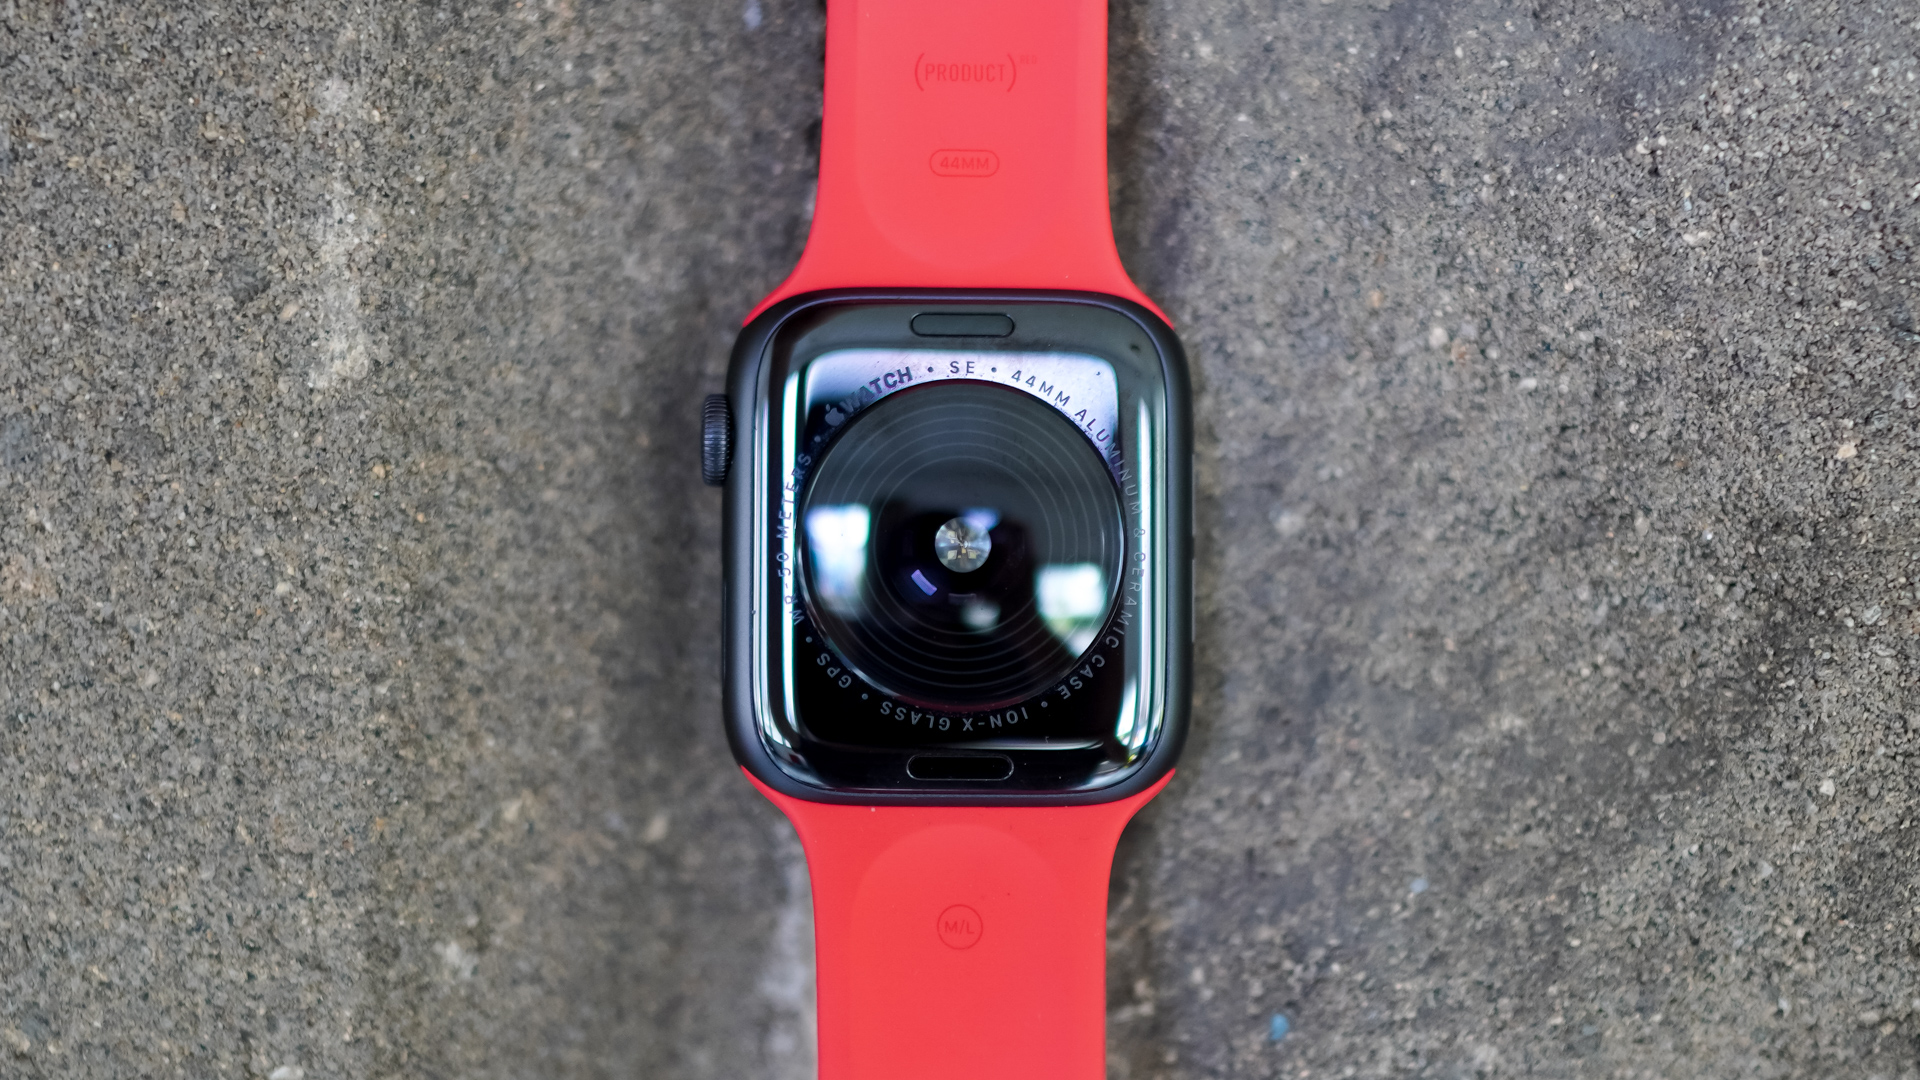 The Apple Watch SE rests face down on a stone surface displaying the sensor on the back of the device.